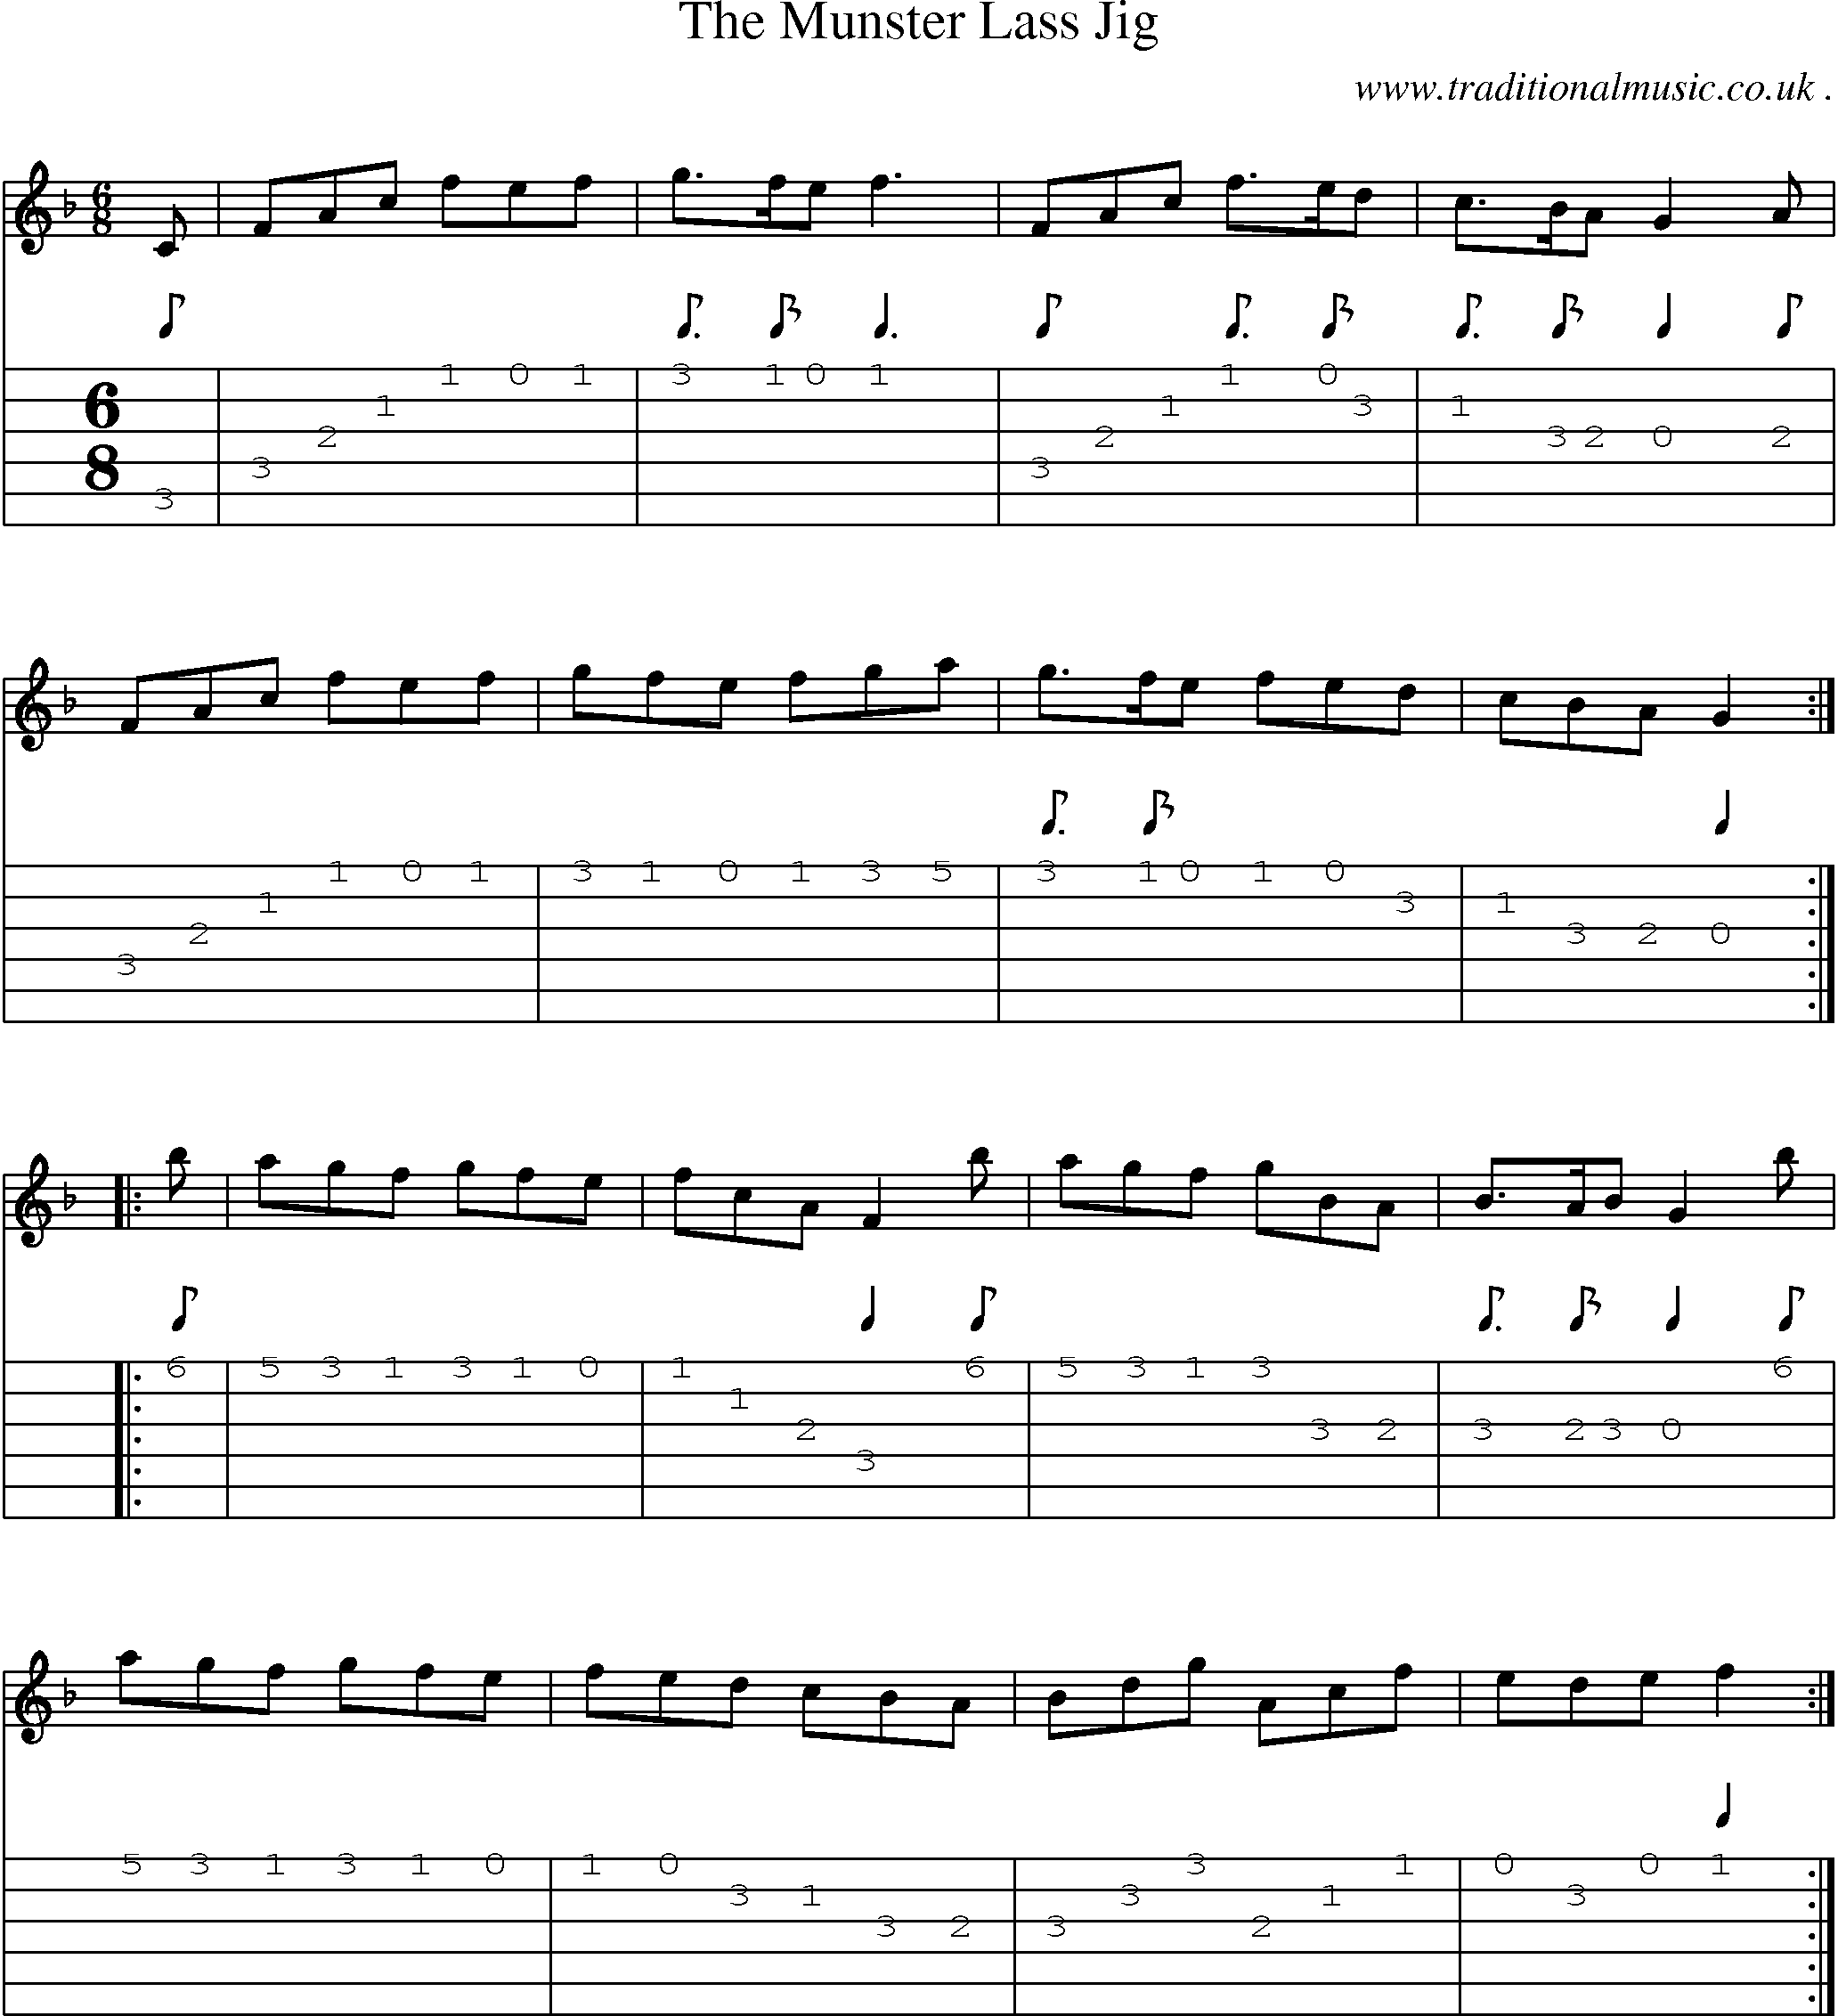 Sheet-Music and Guitar Tabs for The Munster Lass Jig